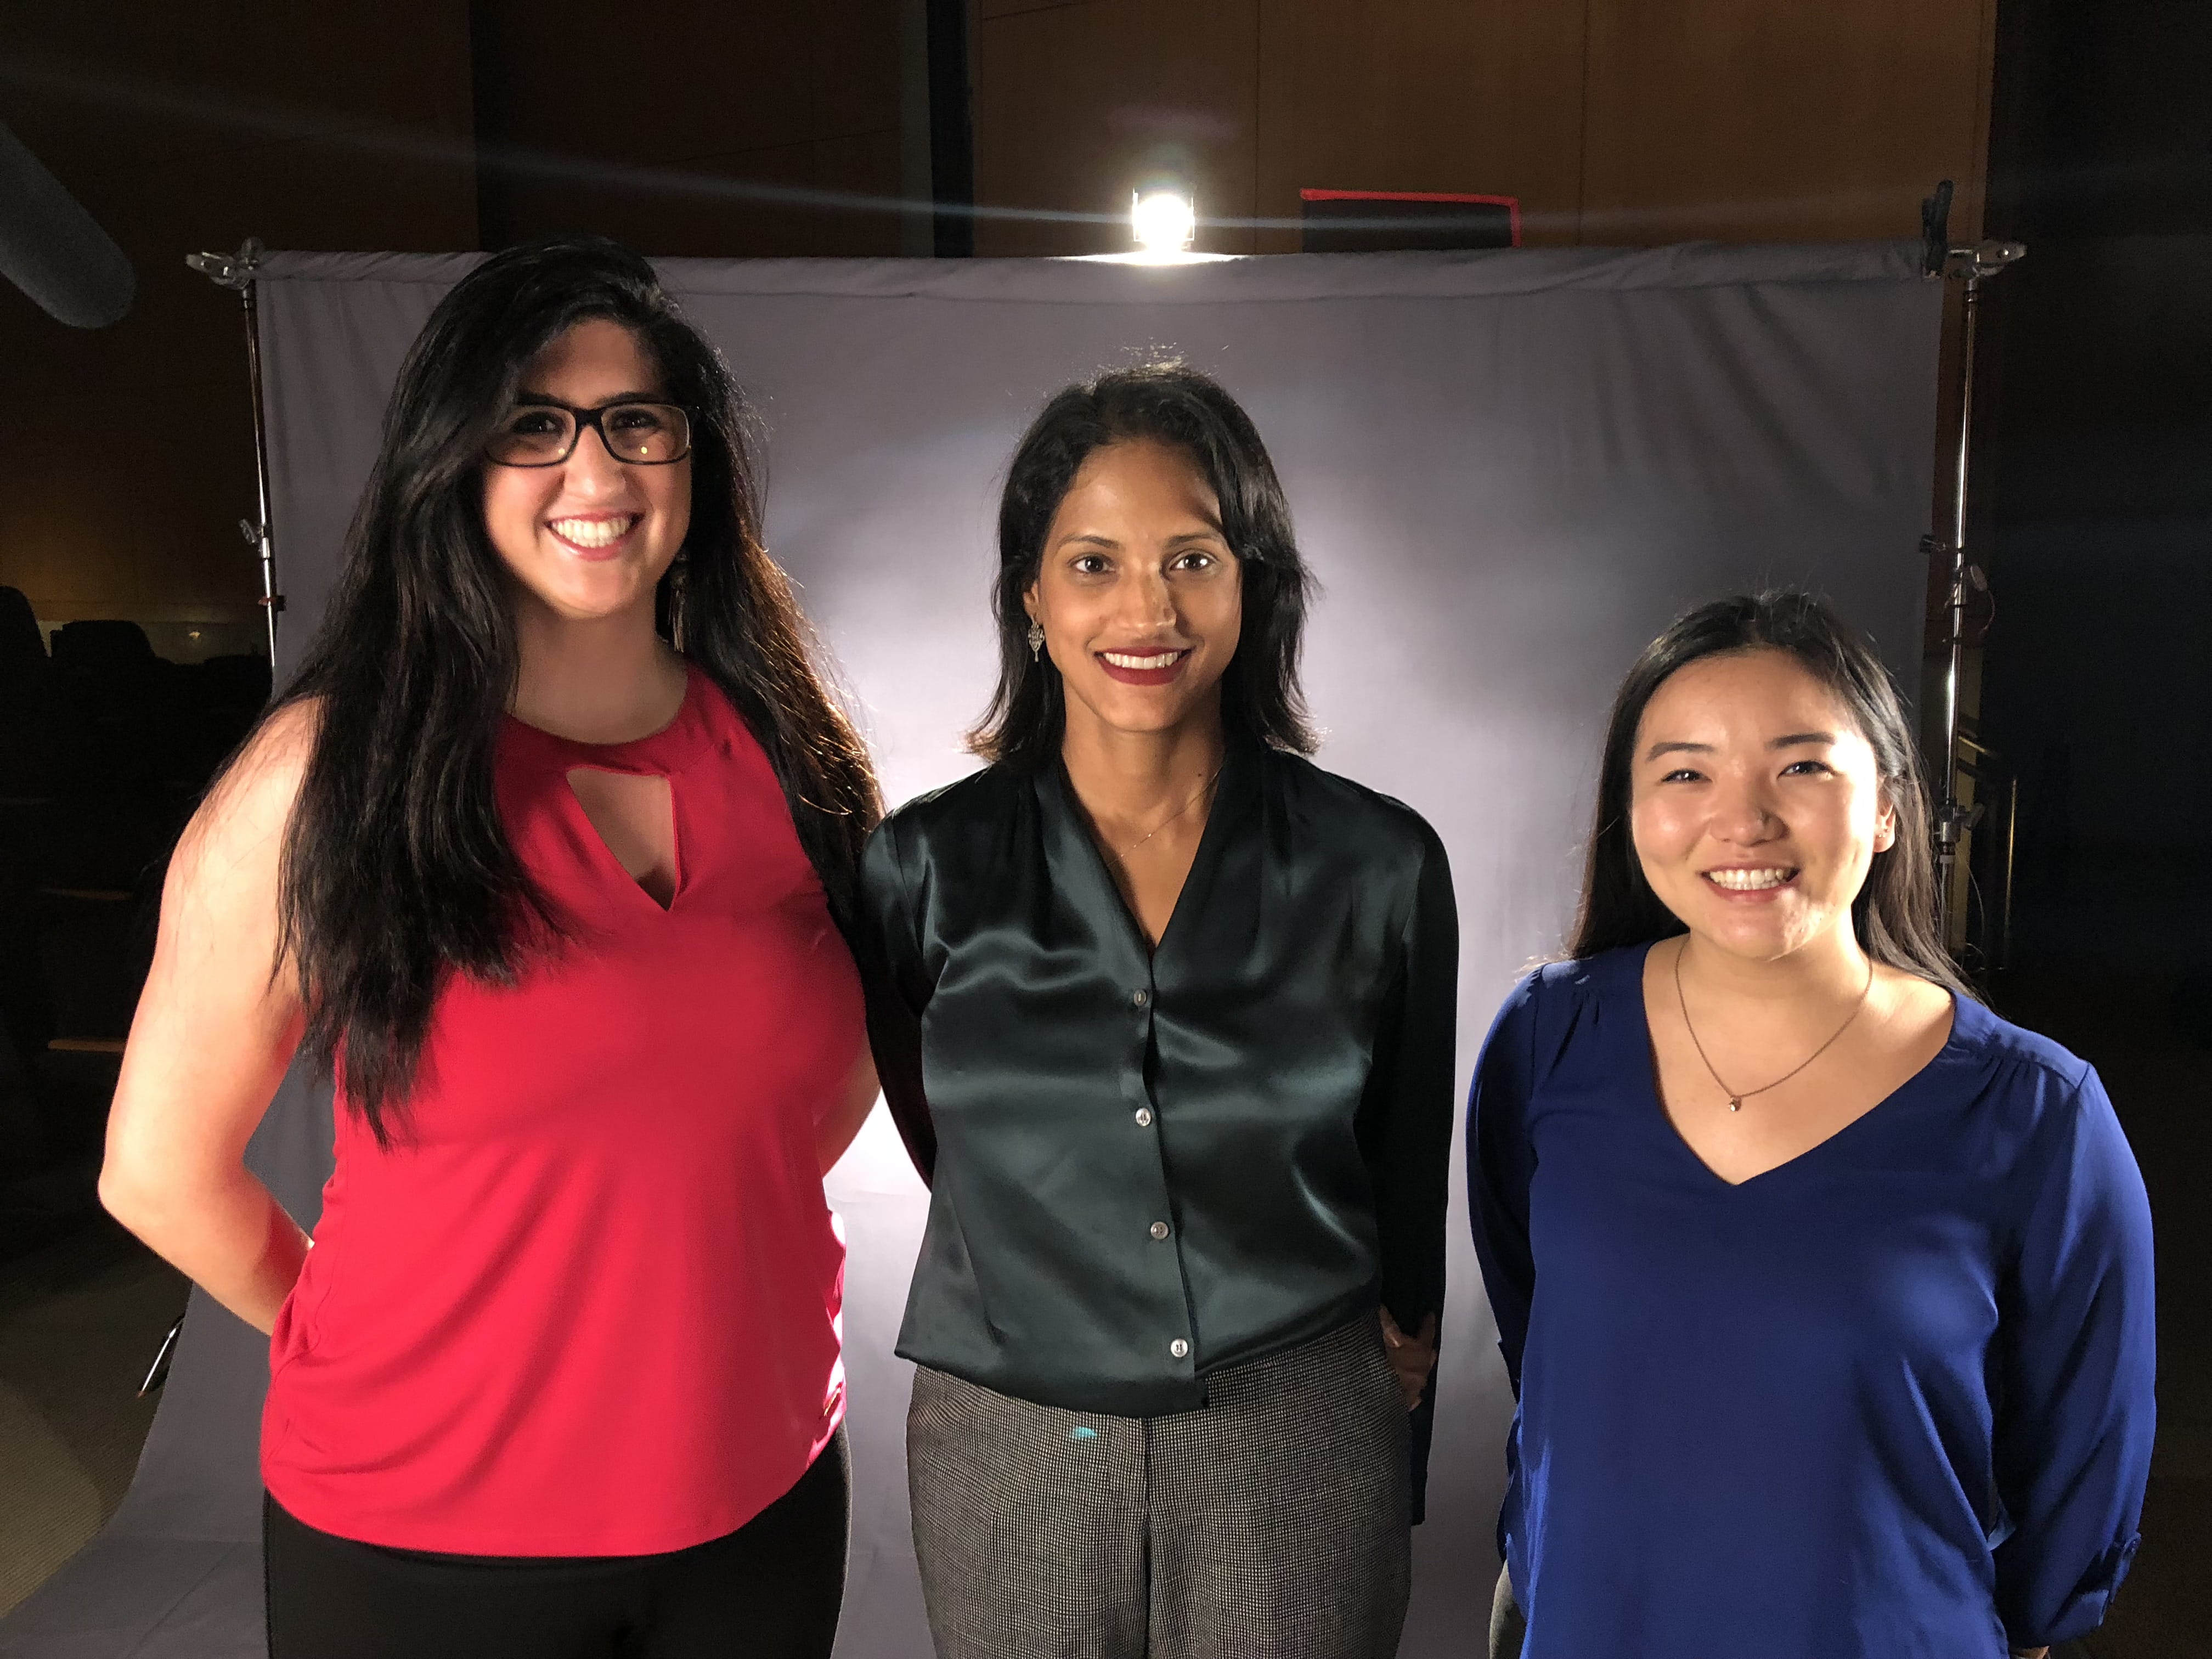 Filming for the Healthy Heroes Study Documentary at Salk Institute, October 2018